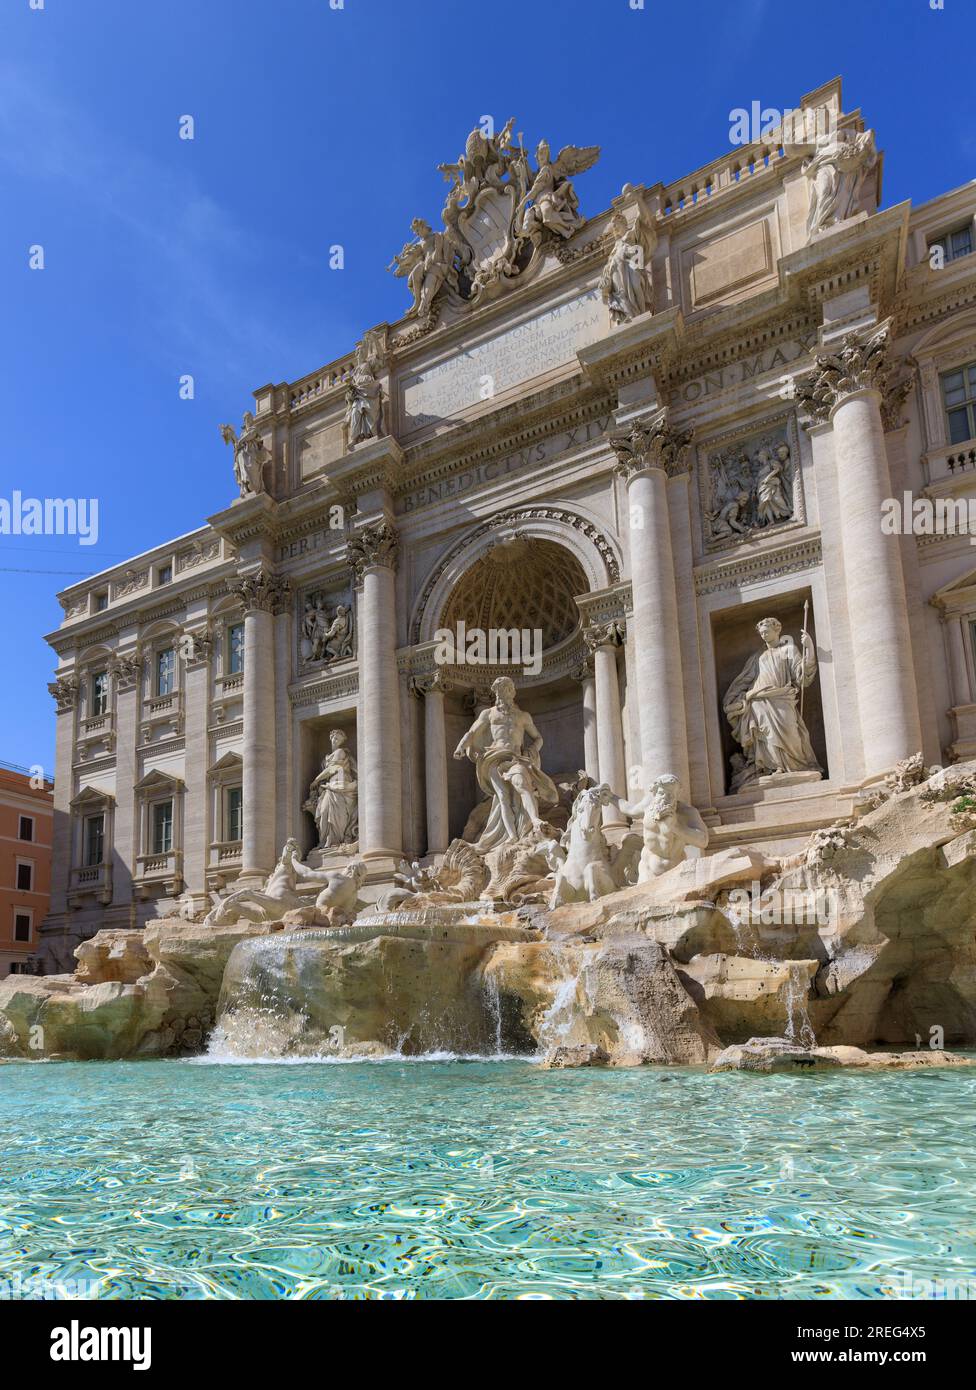 The ‘Fontana di Trevi’(Trevi Fountain) is perhaps the most famous fountain in the world in Rome, Italy.T Stock Photo